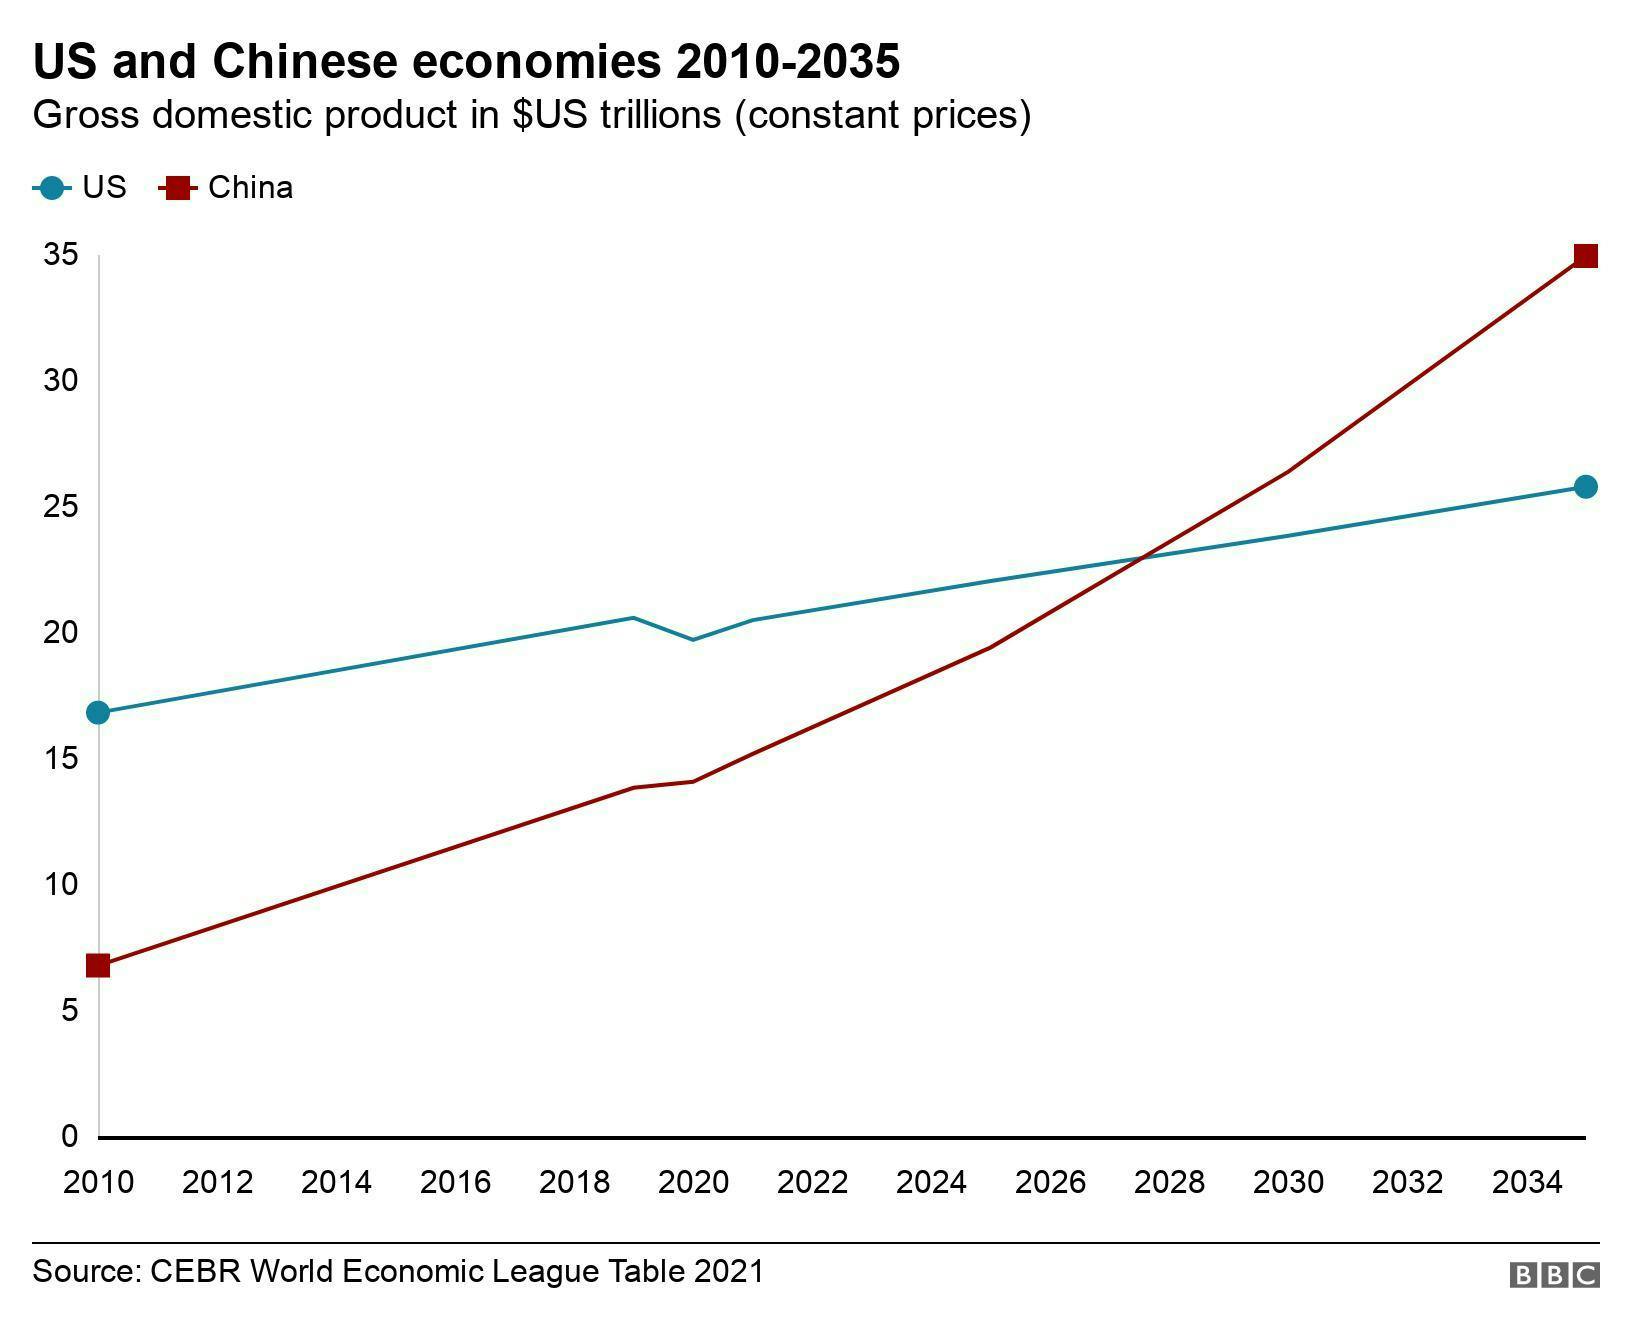 China to overtake US as world's biggest economy by 2028